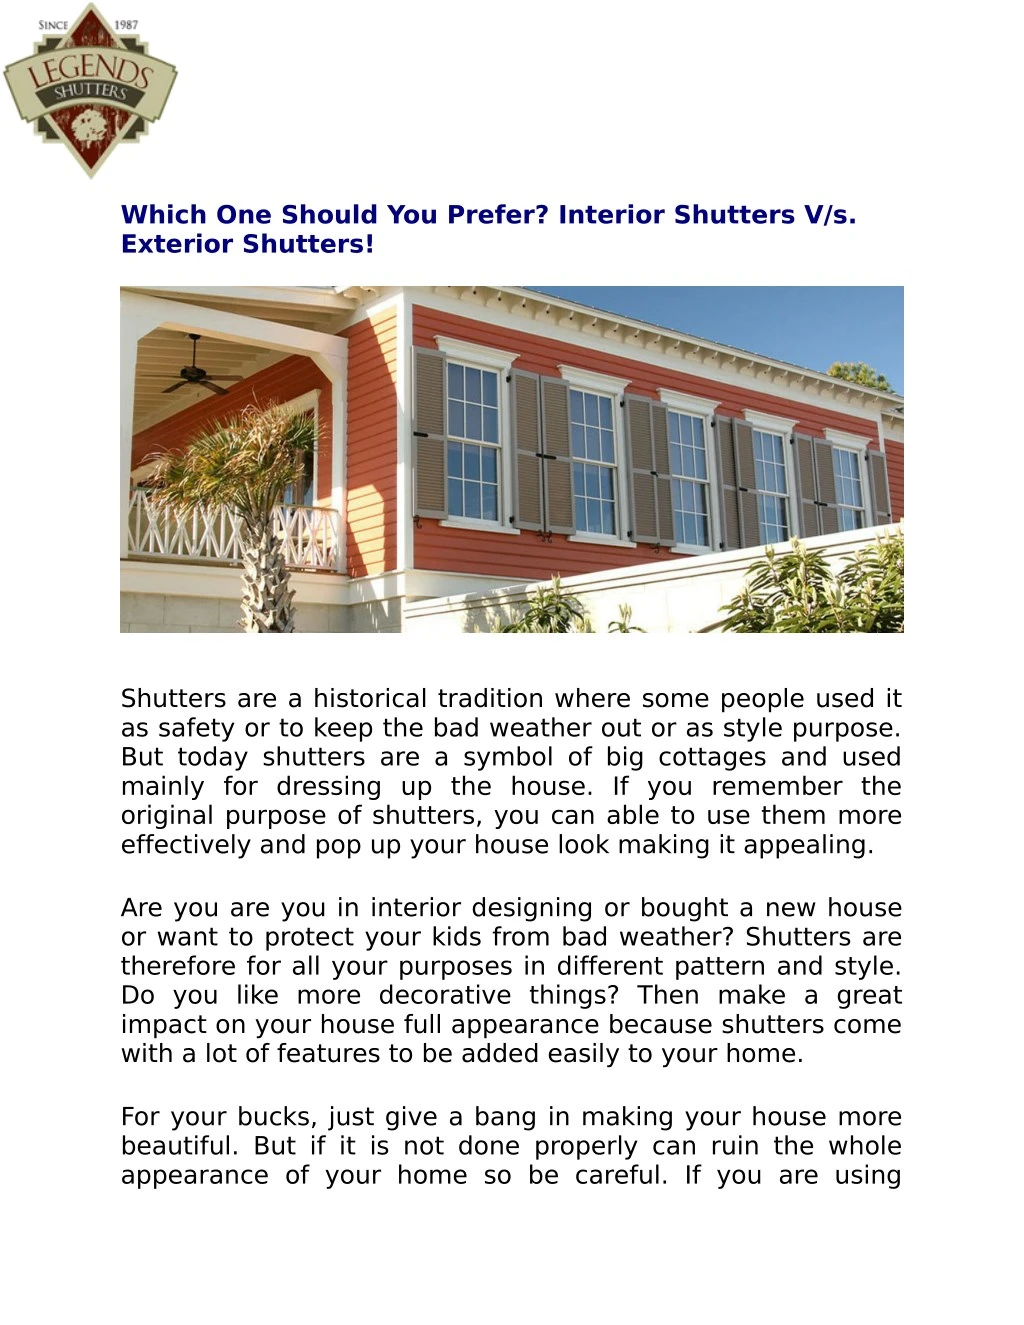 which one should you prefer interior shutters